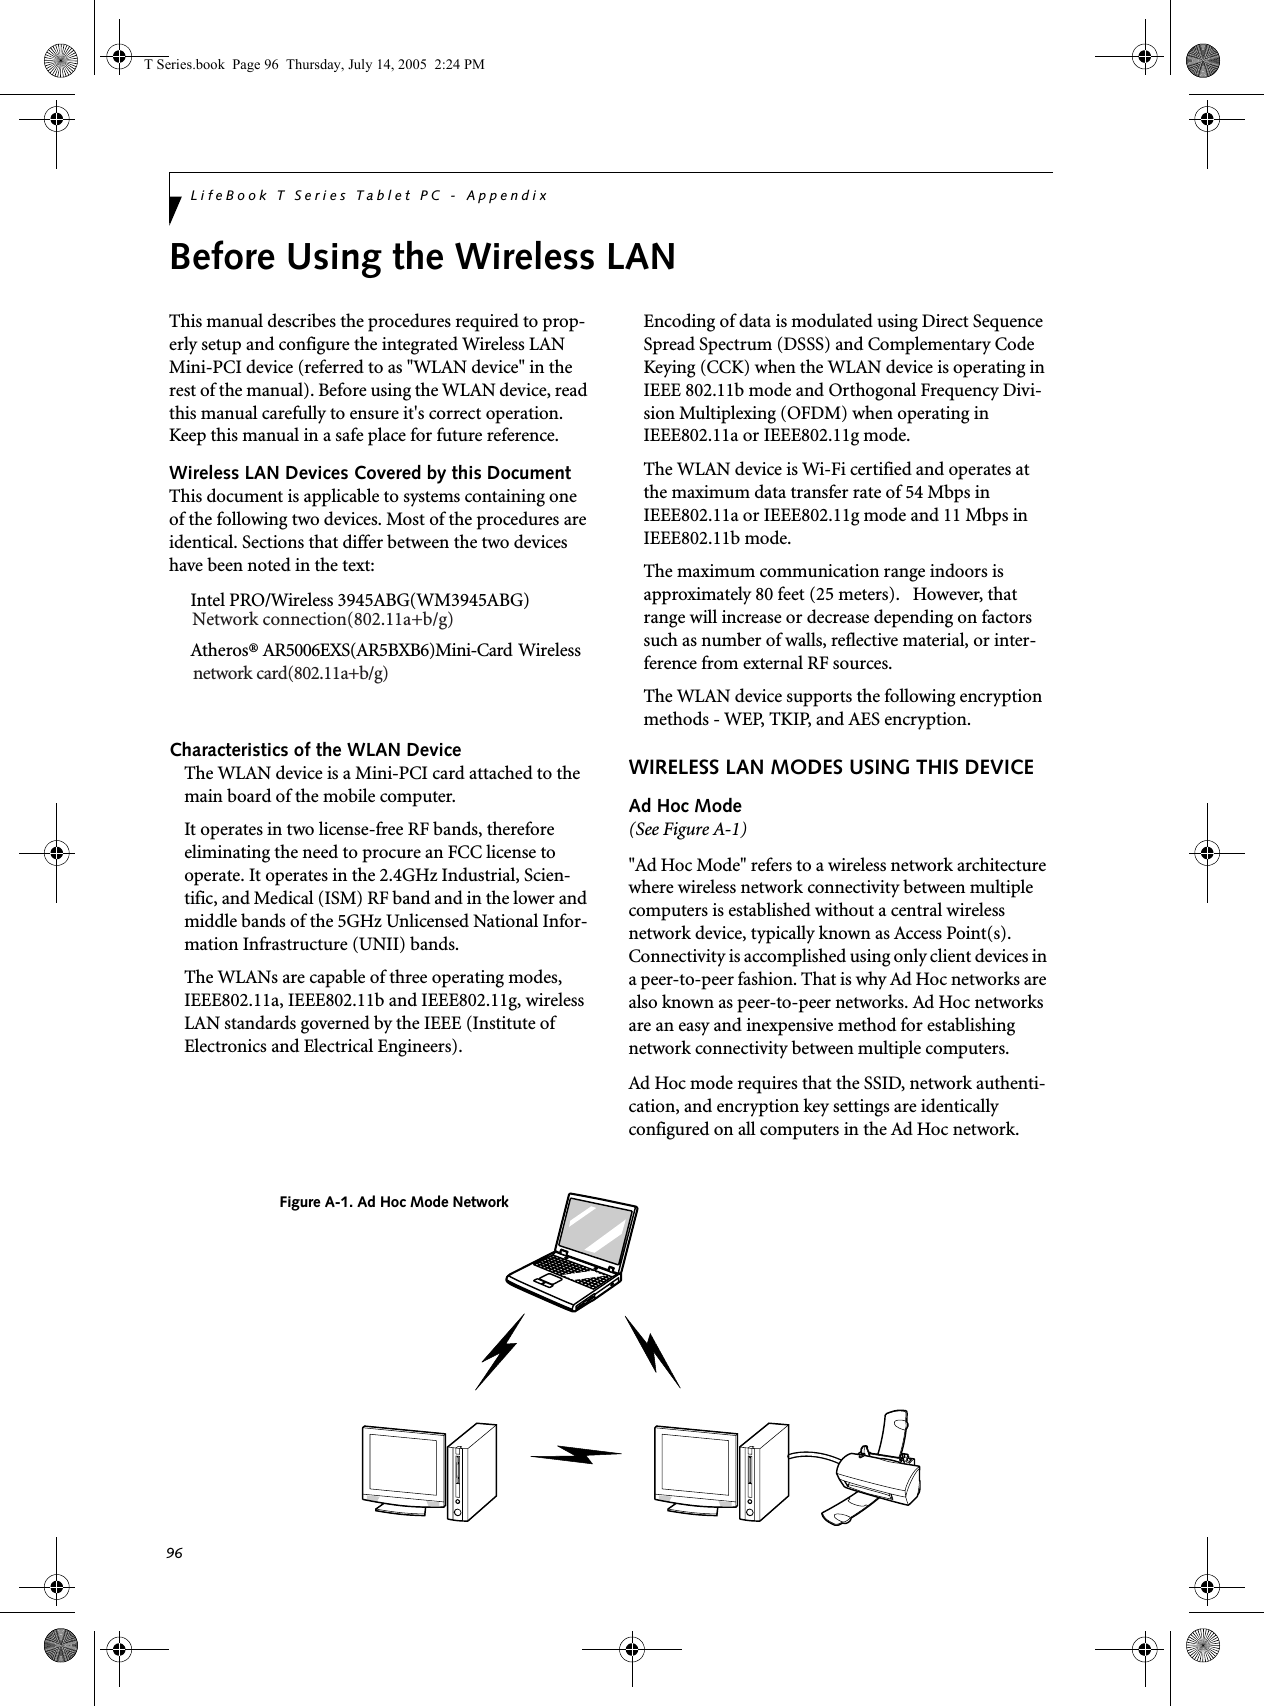 96LifeBook T Series Tablet PC - AppendixBefore Using the Wireless LANThis manual describes the procedures required to prop-erly setup and configure the integrated Wireless LAN Mini-PCI device (referred to as &quot;WLAN device&quot; in the rest of the manual). Before using the WLAN device, read this manual carefully to ensure it&apos;s correct operation. Keep this manual in a safe place for future reference.Wireless LAN Devices Covered by this DocumentThis document is applicable to systems containing one of the following two devices. Most of the procedures are identical. Sections that differ between the two devices have been noted in the text:Intel PRO/Wireless 3945ABG(WM3945ABG)Atheros® AR5006EXS(AR5BXB6)Mini-Card   Wireless Characteristics of the WLAN DeviceThe WLAN device is a Mini-PCI card attached to the main board of the mobile computer. It operates in two license-free RF bands, therefore eliminating the need to procure an FCC license to operate. It operates in the 2.4GHz Industrial, Scien-tific, and Medical (ISM) RF band and in the lower and middle bands of the 5GHz Unlicensed National Infor-mation Infrastructure (UNII) bands. The WLANs are capable of three operating modes, IEEE802.11a, IEEE802.11b and IEEE802.11g, wireless LAN standards governed by the IEEE (Institute of Electronics and Electrical Engineers). Encoding of data is modulated using Direct Sequence Spread Spectrum (DSSS) and Complementary Code Keying (CCK) when the WLAN device is operating in IEEE 802.11b mode and Orthogonal Frequency Divi-sion Multiplexing (OFDM) when operating in IEEE802.11a or IEEE802.11g mode. The WLAN device is Wi-Fi certified and operates at the maximum data transfer rate of 54 Mbps in IEEE802.11a or IEEE802.11g mode and 11 Mbps in IEEE802.11b mode.The maximum communication range indoors is approximately 80 feet (25 meters).   However, that range will increase or decrease depending on factors such as number of walls, reflective material, or inter-ference from external RF sources.The WLAN device supports the following encryption methods - WEP, TKIP, and AES encryption.WIRELESS LAN MODES USING THIS DEVICEAd Hoc Mode (See Figure A-1)&quot;Ad Hoc Mode&quot; refers to a wireless network architecture where wireless network connectivity between multiple computers is established without a central wireless network device, typically known as Access Point(s). Connectivity is accomplished using only client devices in a peer-to-peer fashion. That is why Ad Hoc networks are also known as peer-to-peer networks. Ad Hoc networks are an easy and inexpensive method for establishing network connectivity between multiple computers.Ad Hoc mode requires that the SSID, network authenti-cation, and encryption key settings are identically configured on all computers in the Ad Hoc network. Figure A-1. Ad Hoc Mode NetworkT Series.book  Page 96  Thursday, July 14, 2005  2:24 PMNetwork connection(802.11a+b/g)network card(802.11a+b/g)